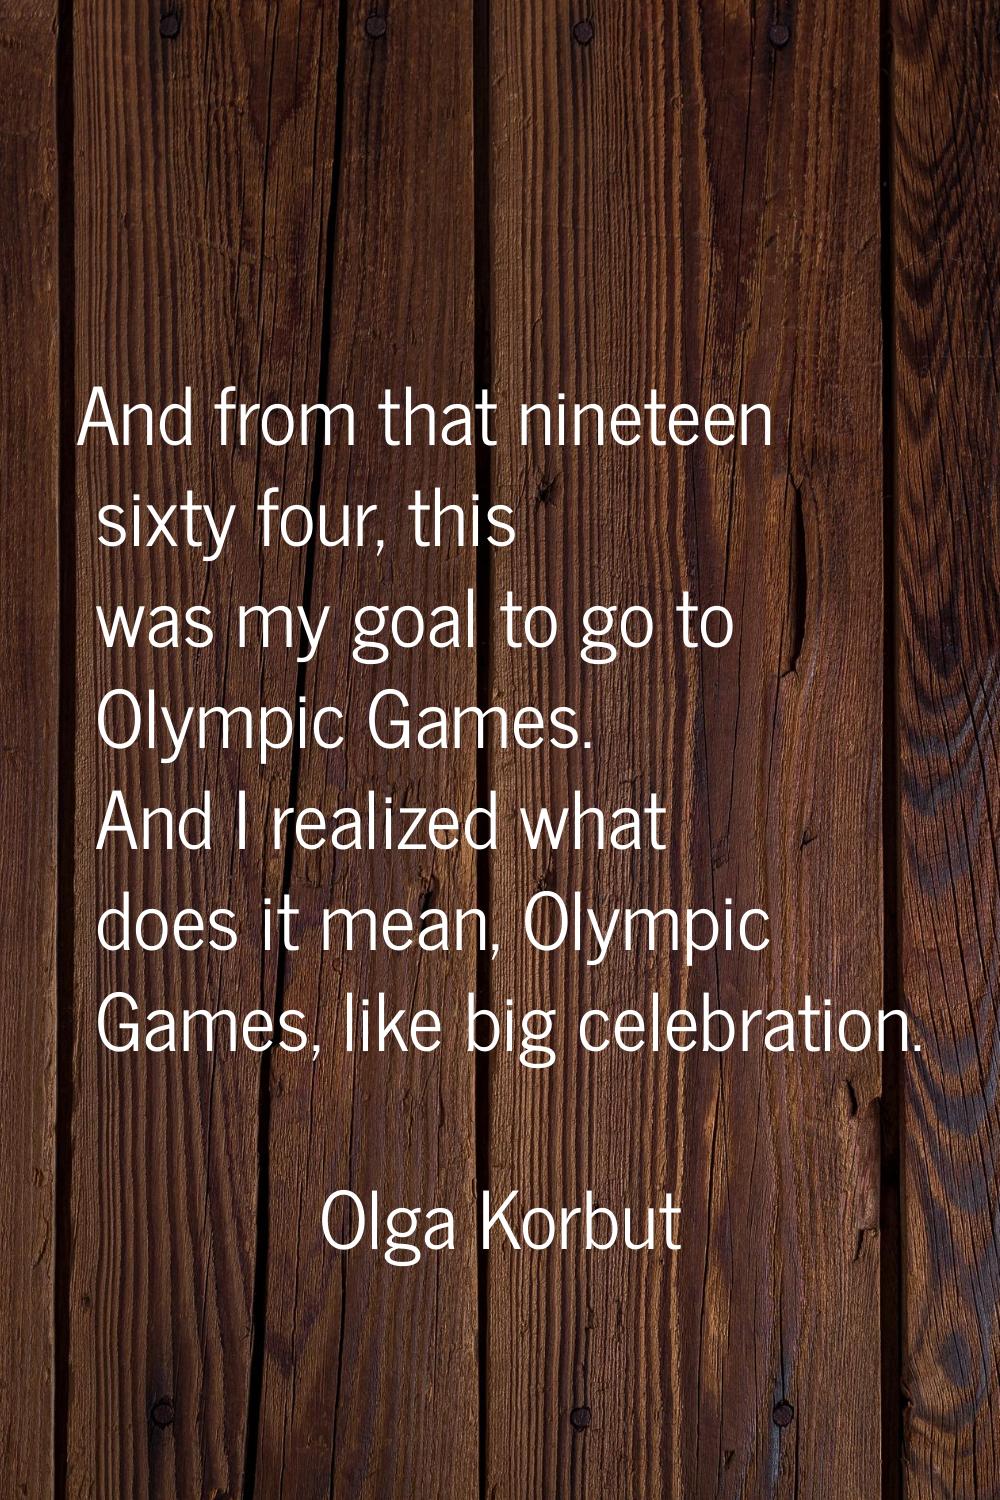 And from that nineteen sixty four, this was my goal to go to Olympic Games. And I realized what doe